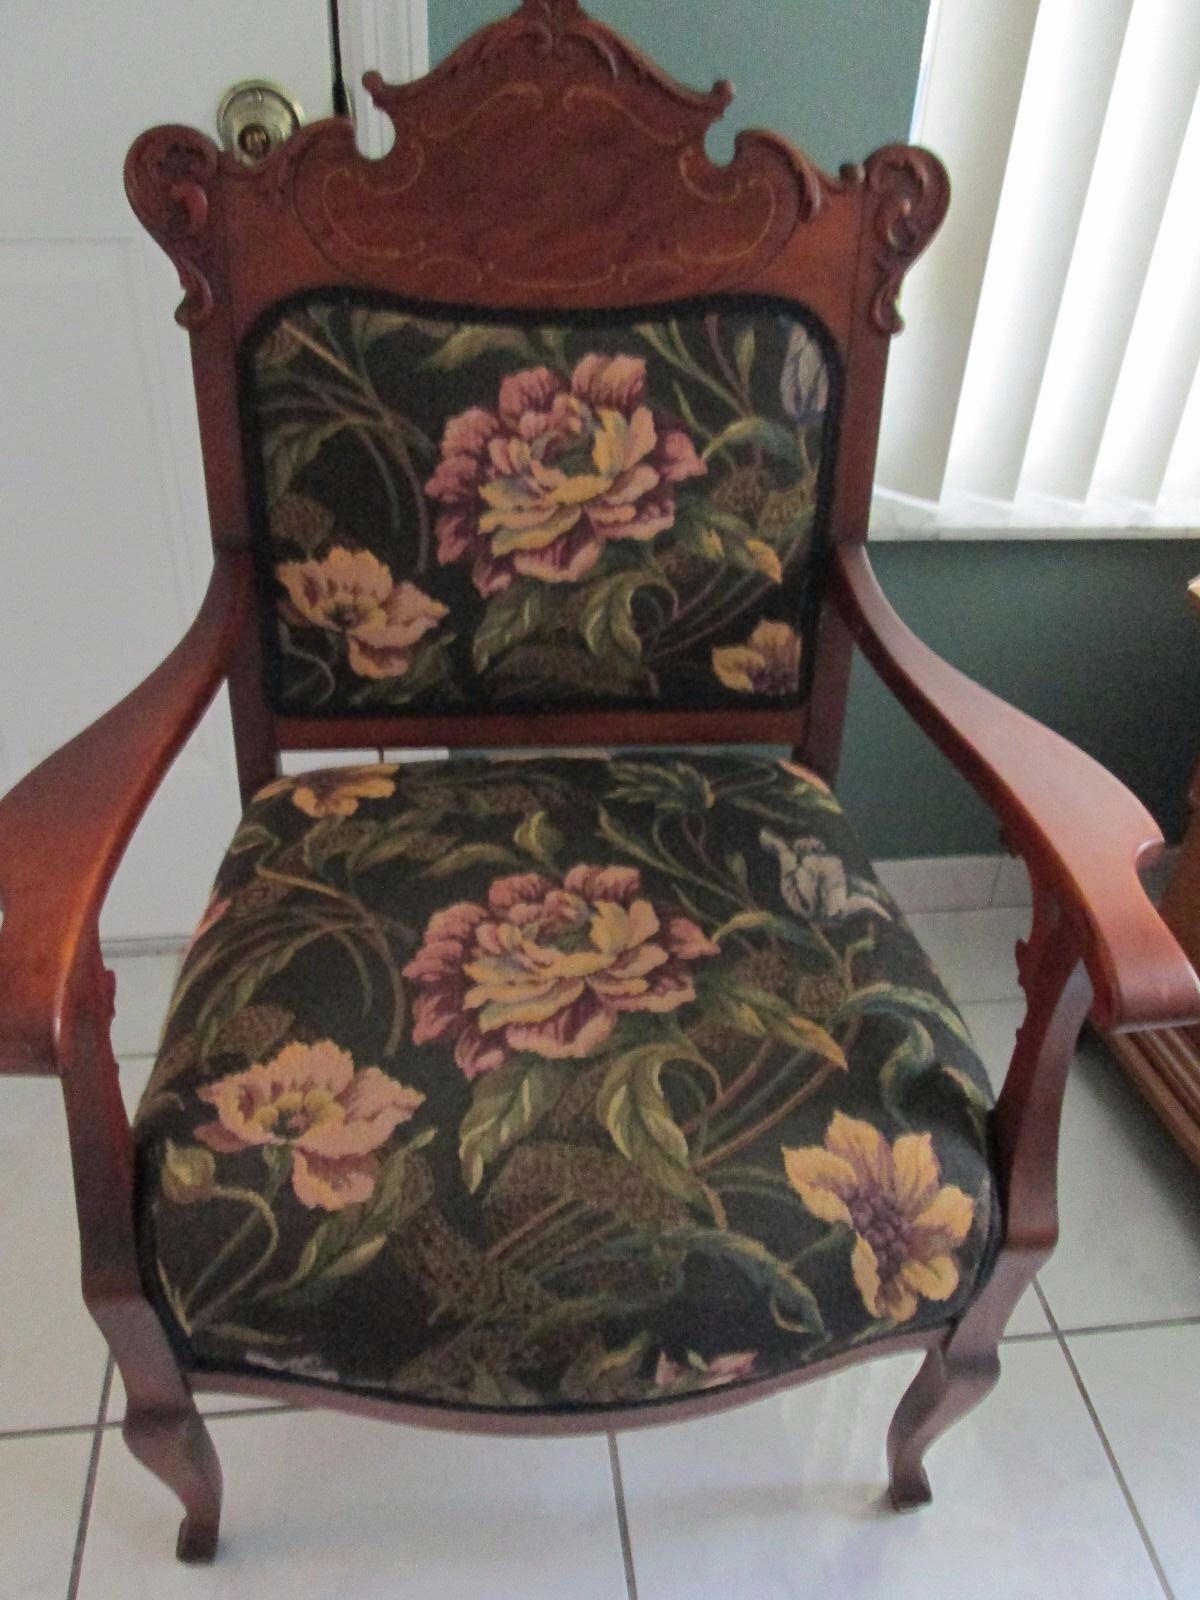 BEAUTIFUL ANTIQUE VICTORIAN WALNUT PARLOR CHAIR (FLORAL UPHOLSTERY)